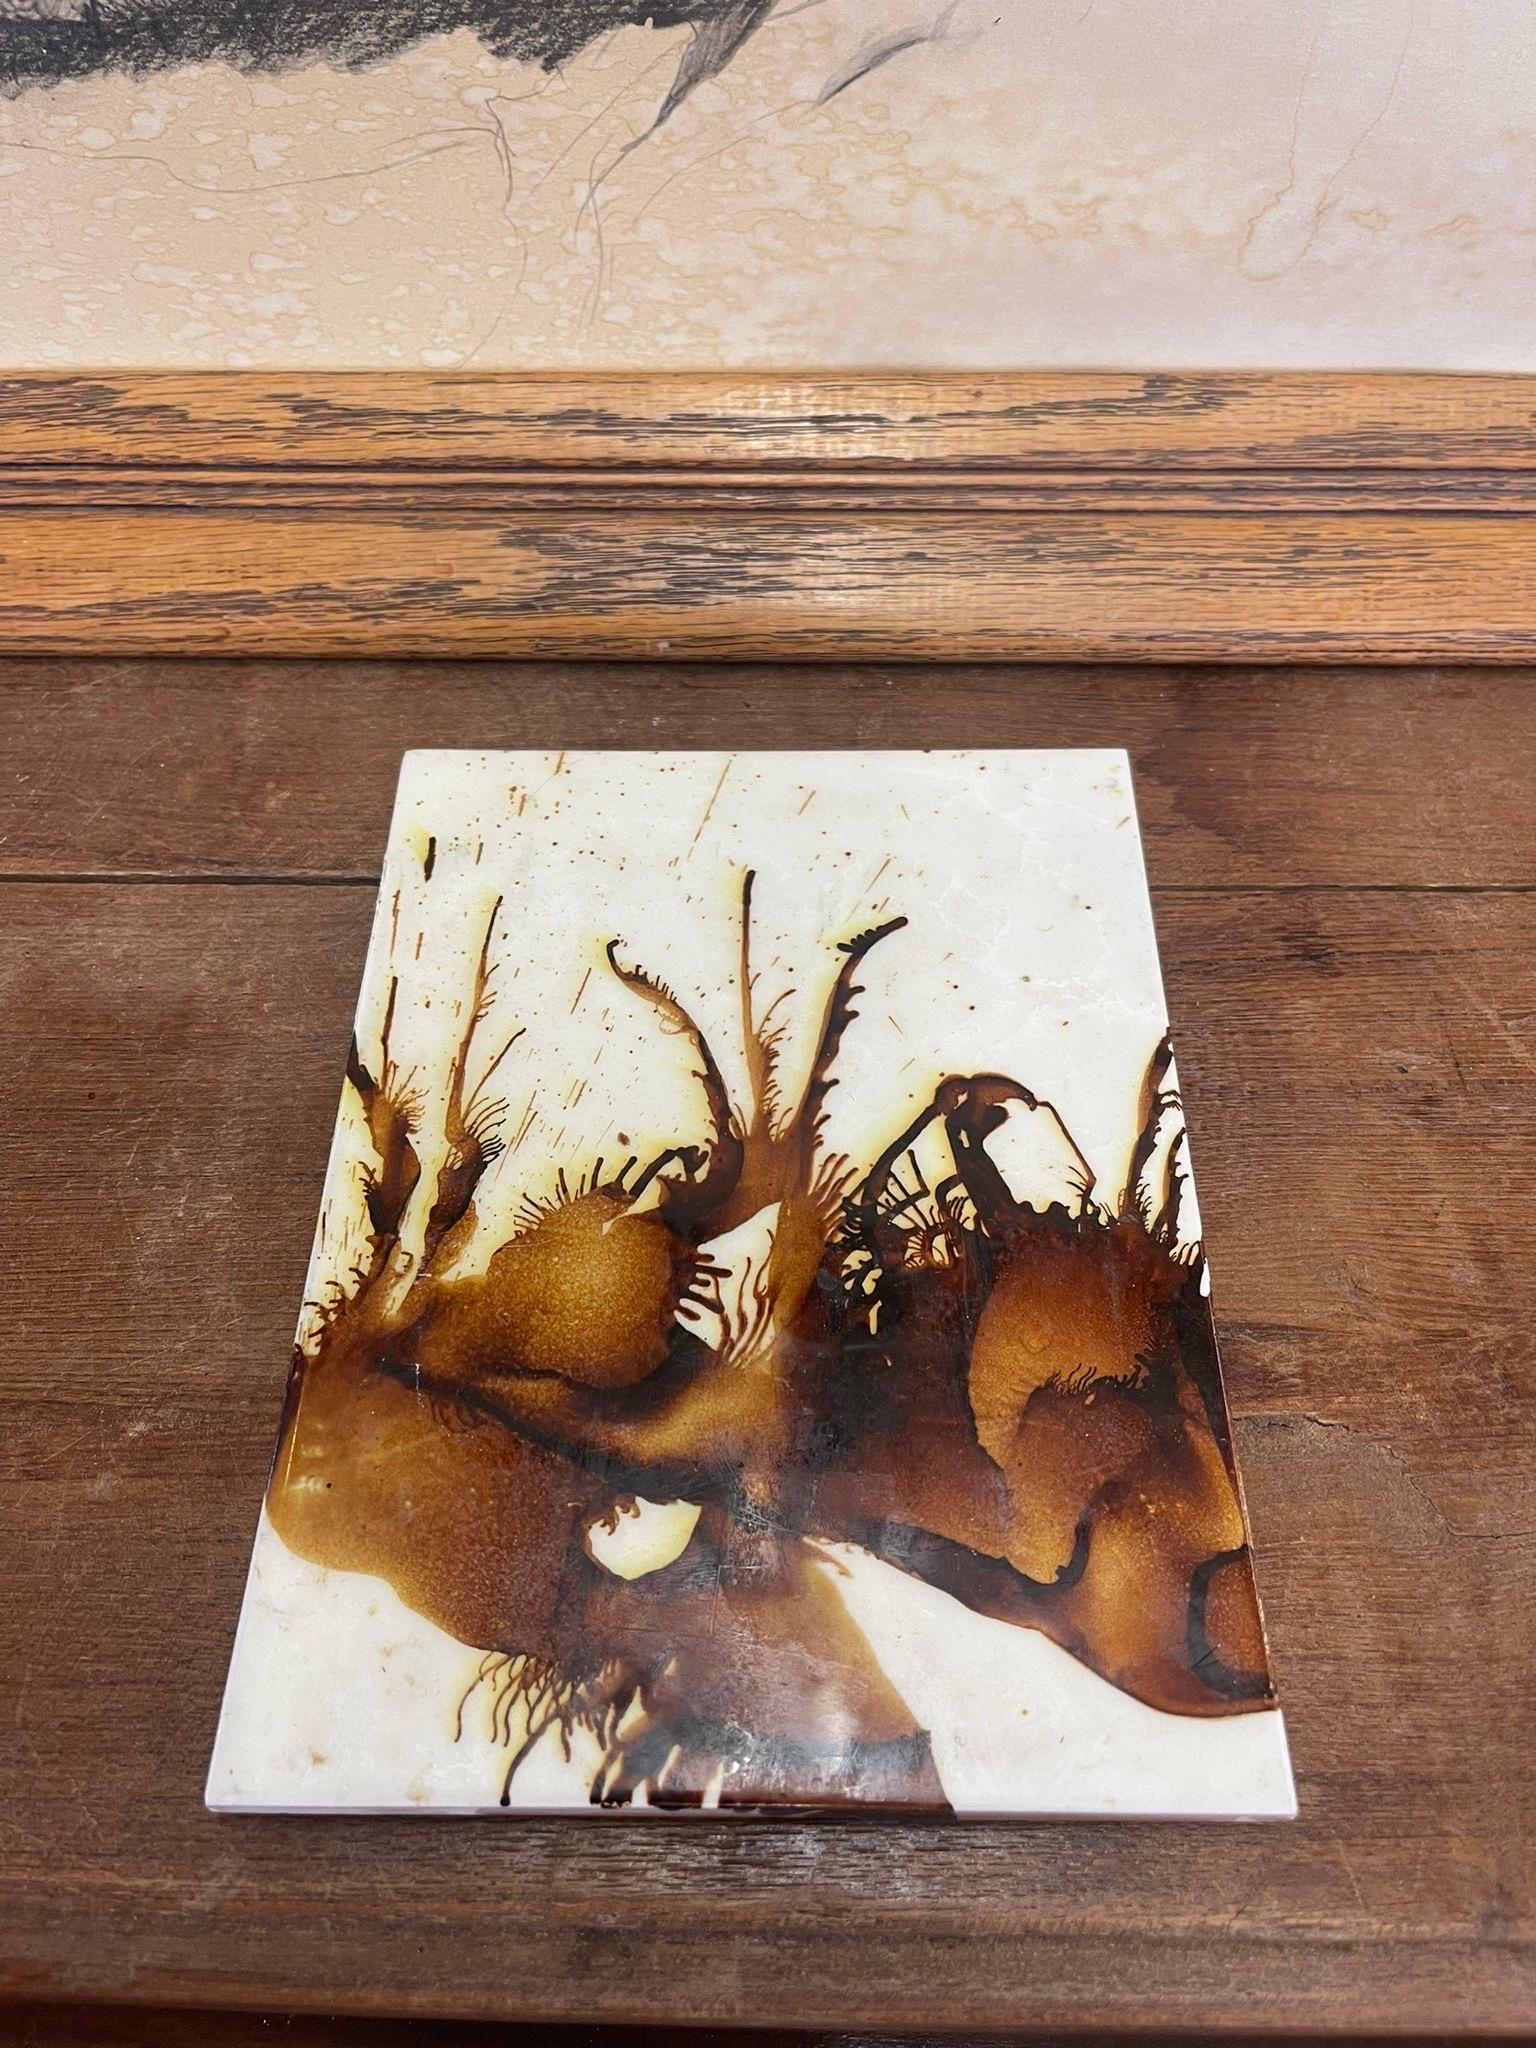 This tile is white and brown toned paint or glaze on top of a ceramic tile. Wall hook in the back for hanging. Vintage Condition Consistent with Age as Pictured.

Dimensions. 8 W ; 6 D ; 0.50 H